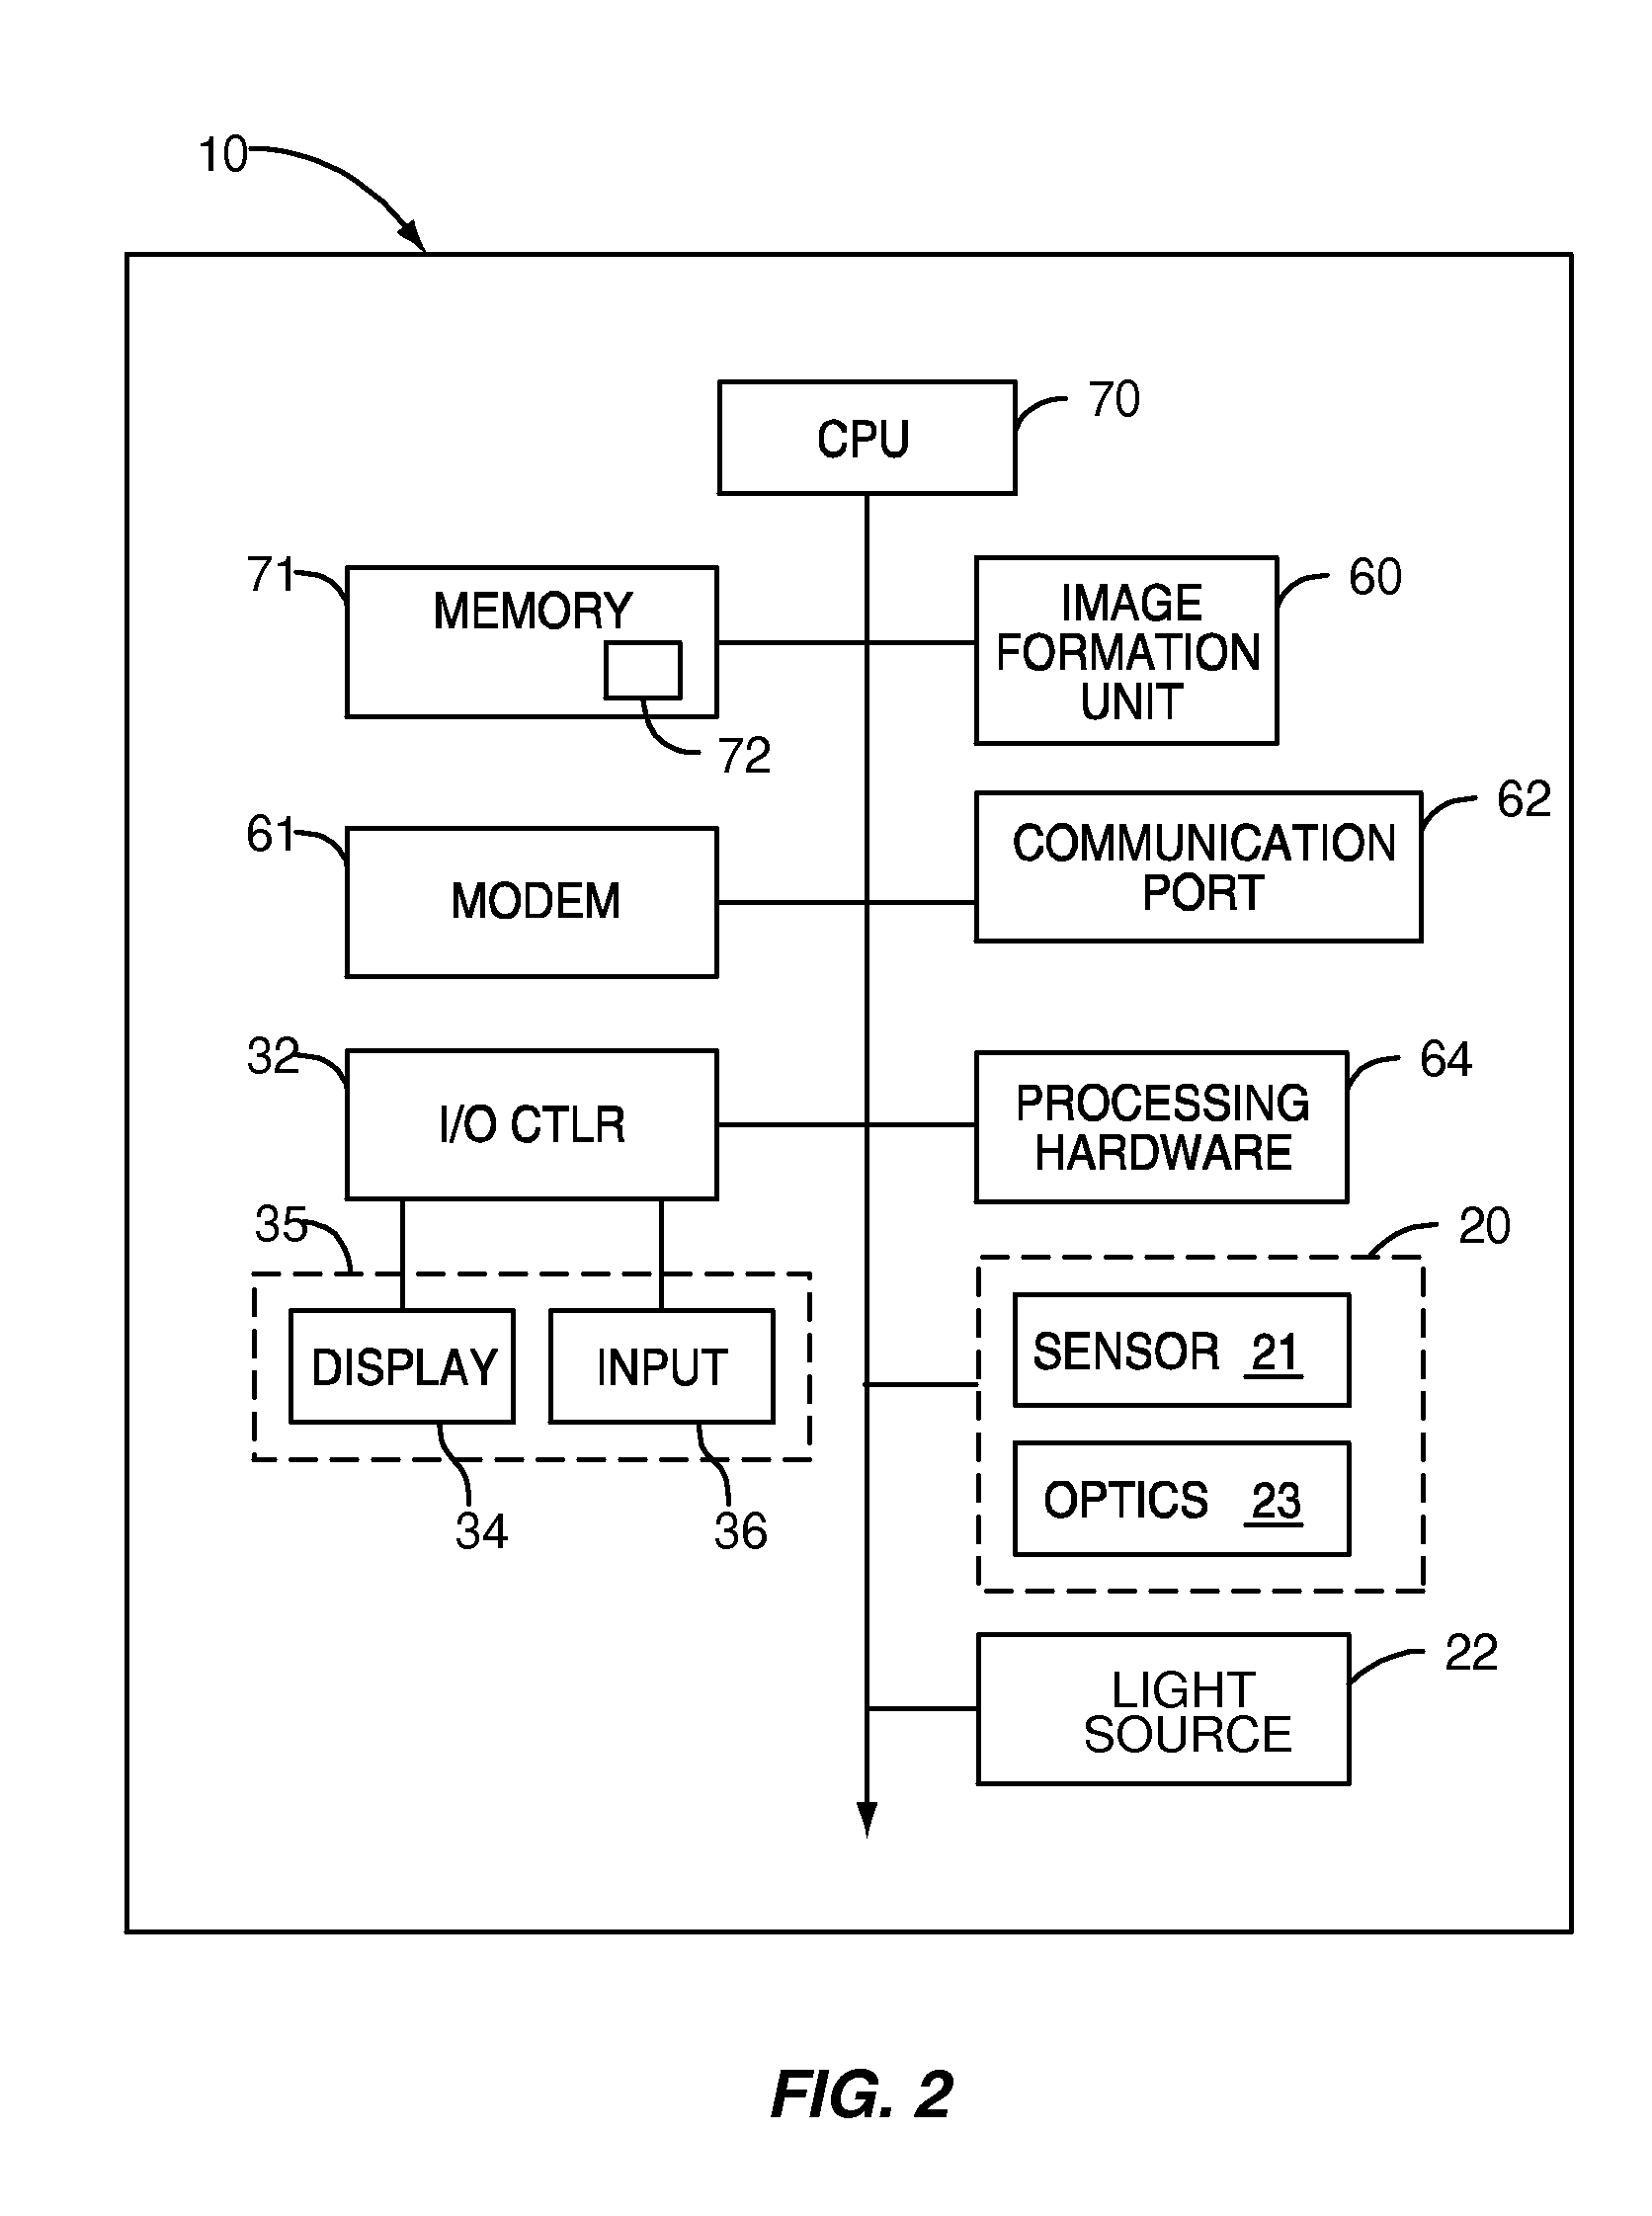 Image Illumination And Capture In A Scanning Device